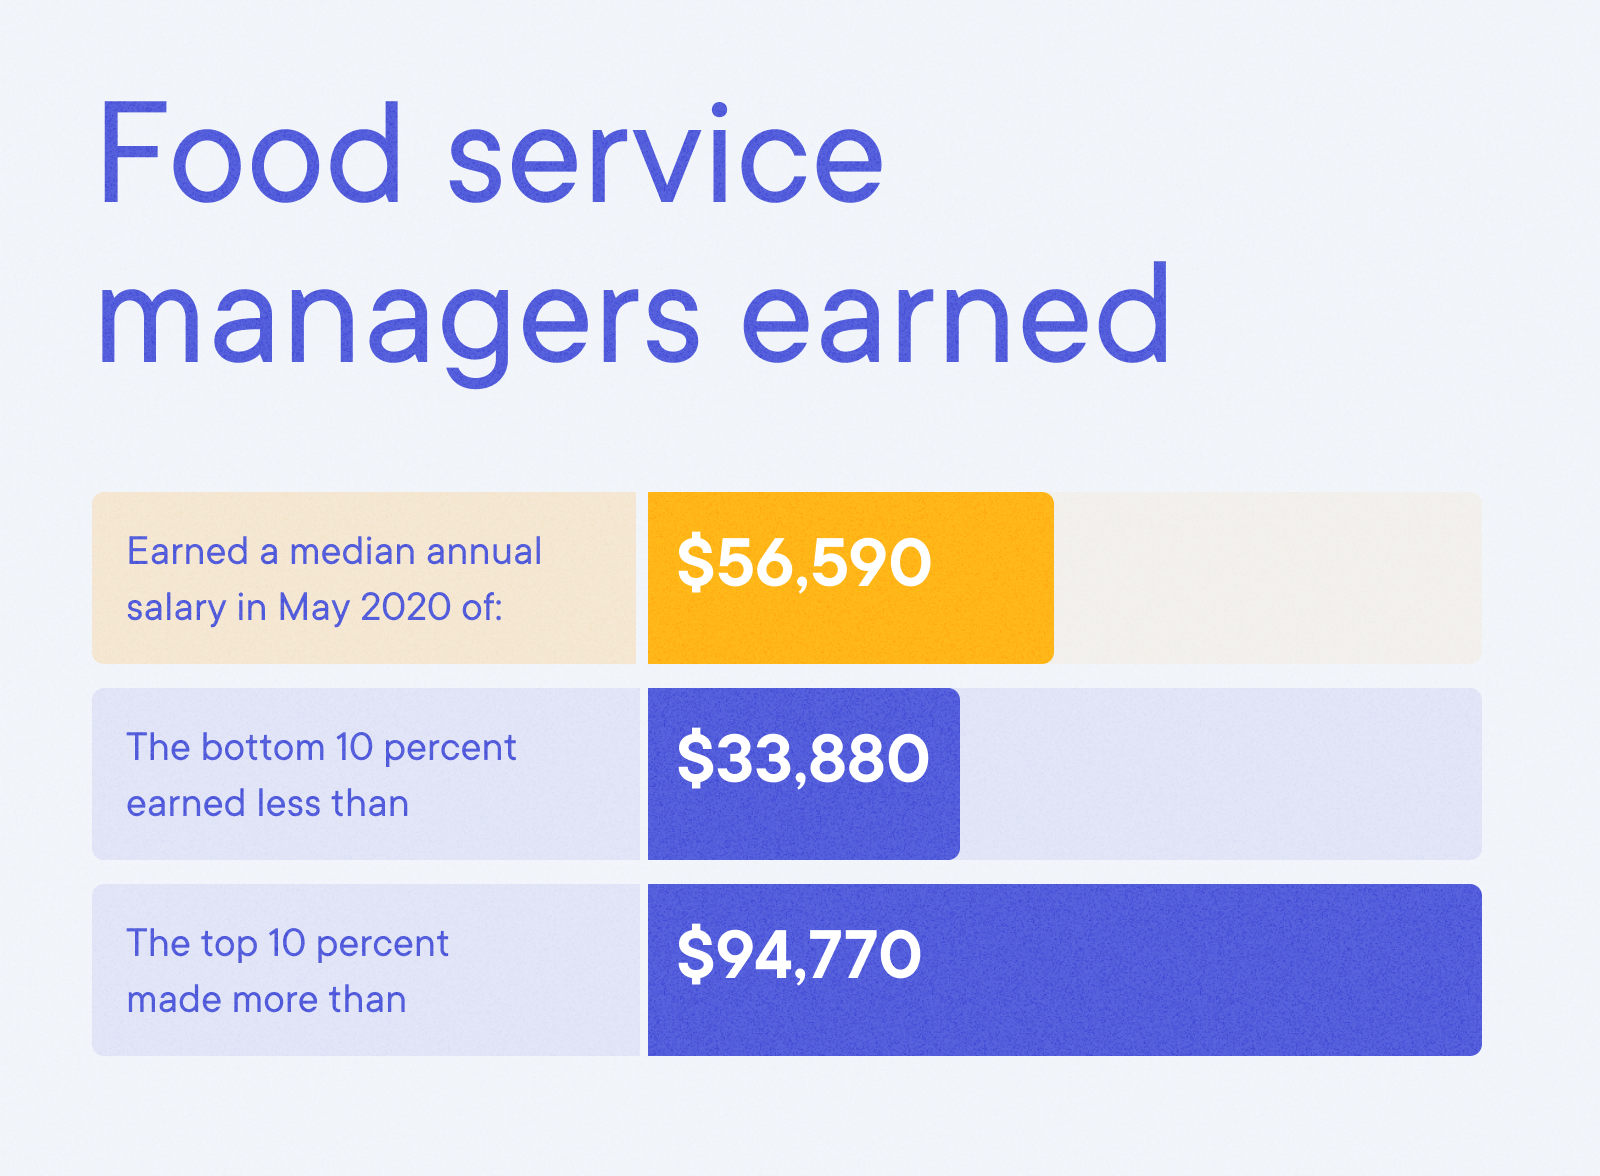 Restaurant Manager - Food service managers earned